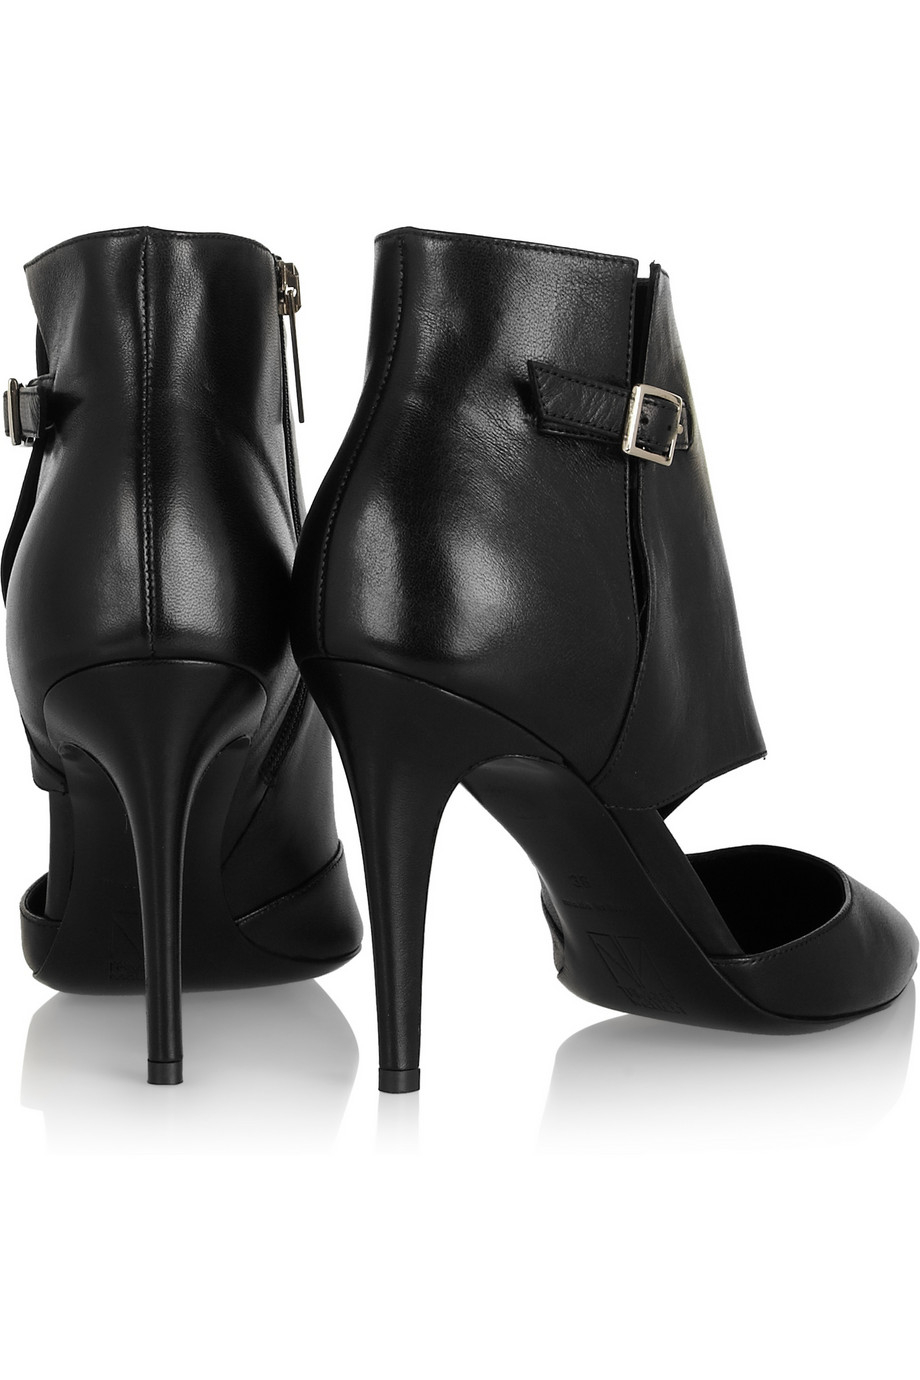 Lyst - Tamara mellon Madness Cutout Leather Ankle Boots in Black